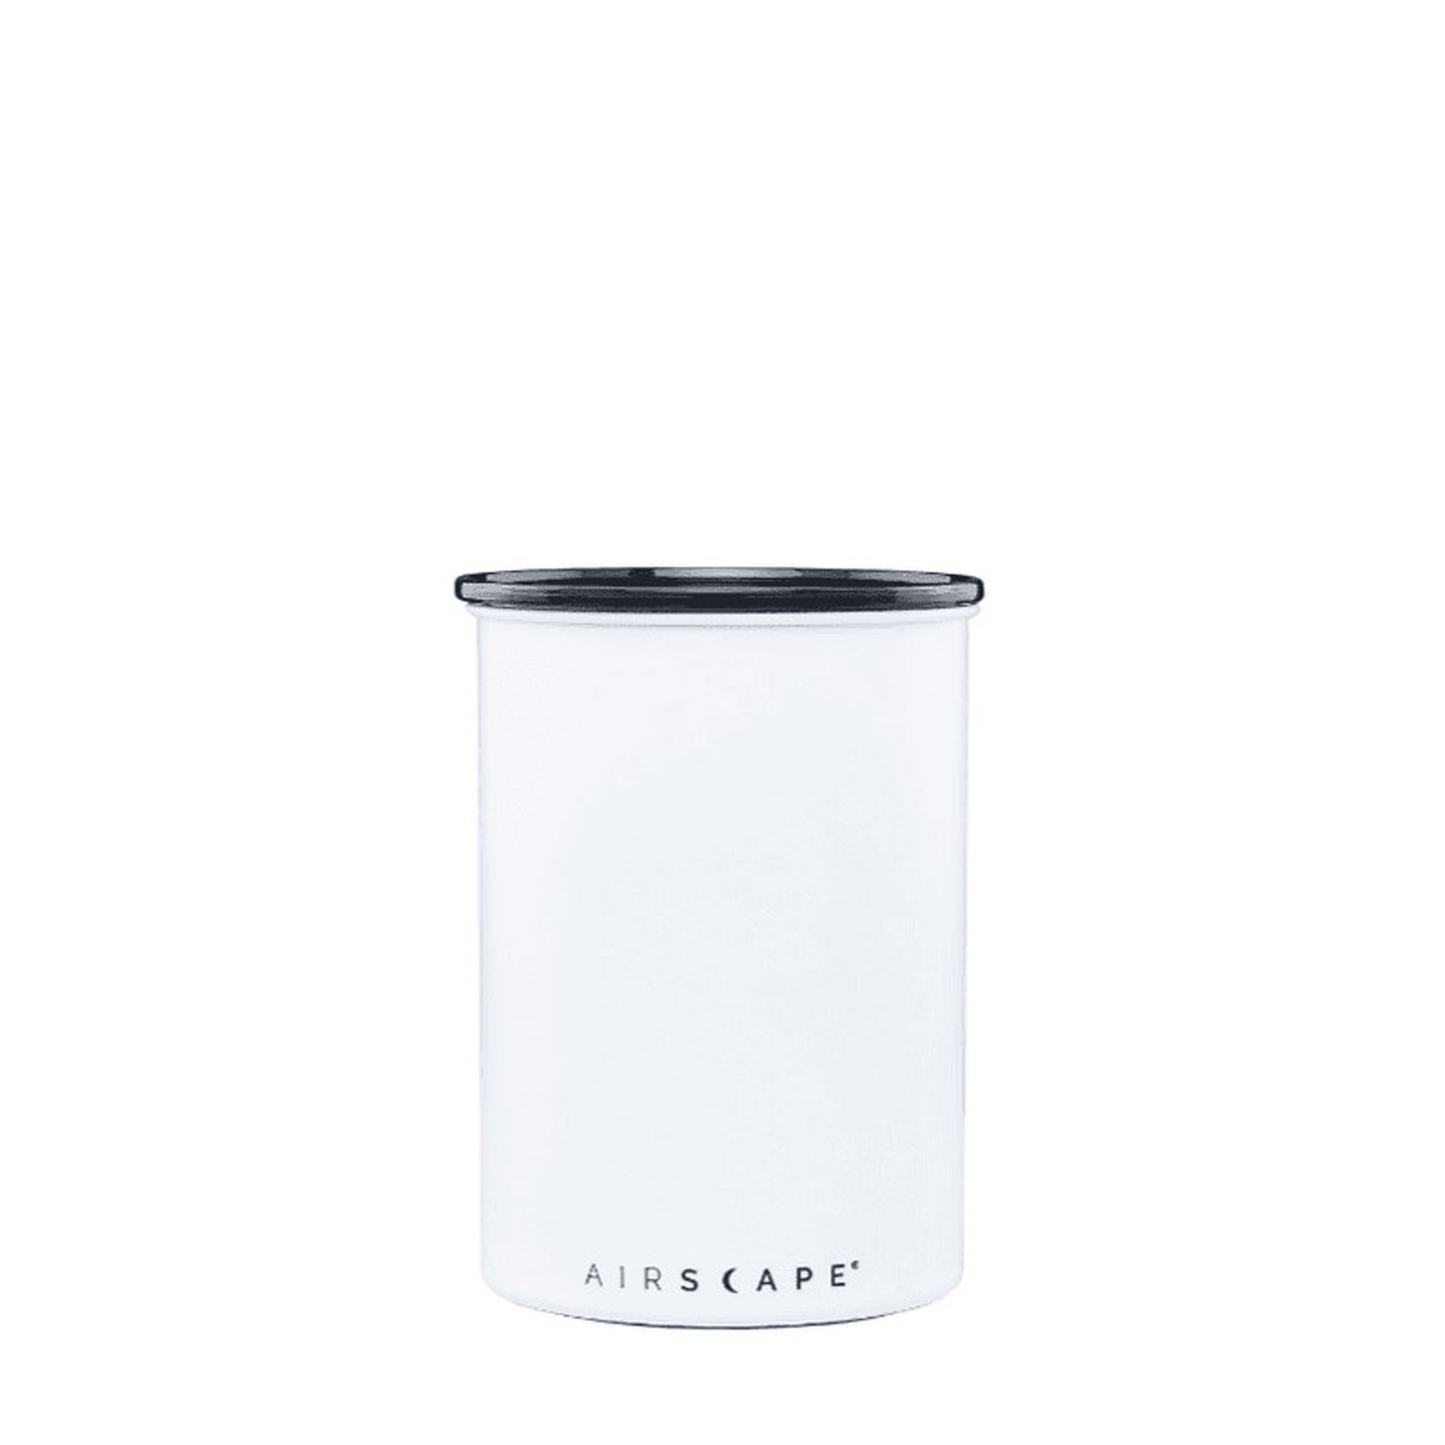 Airscape Airless Coffee Storage Canister 500g Barista